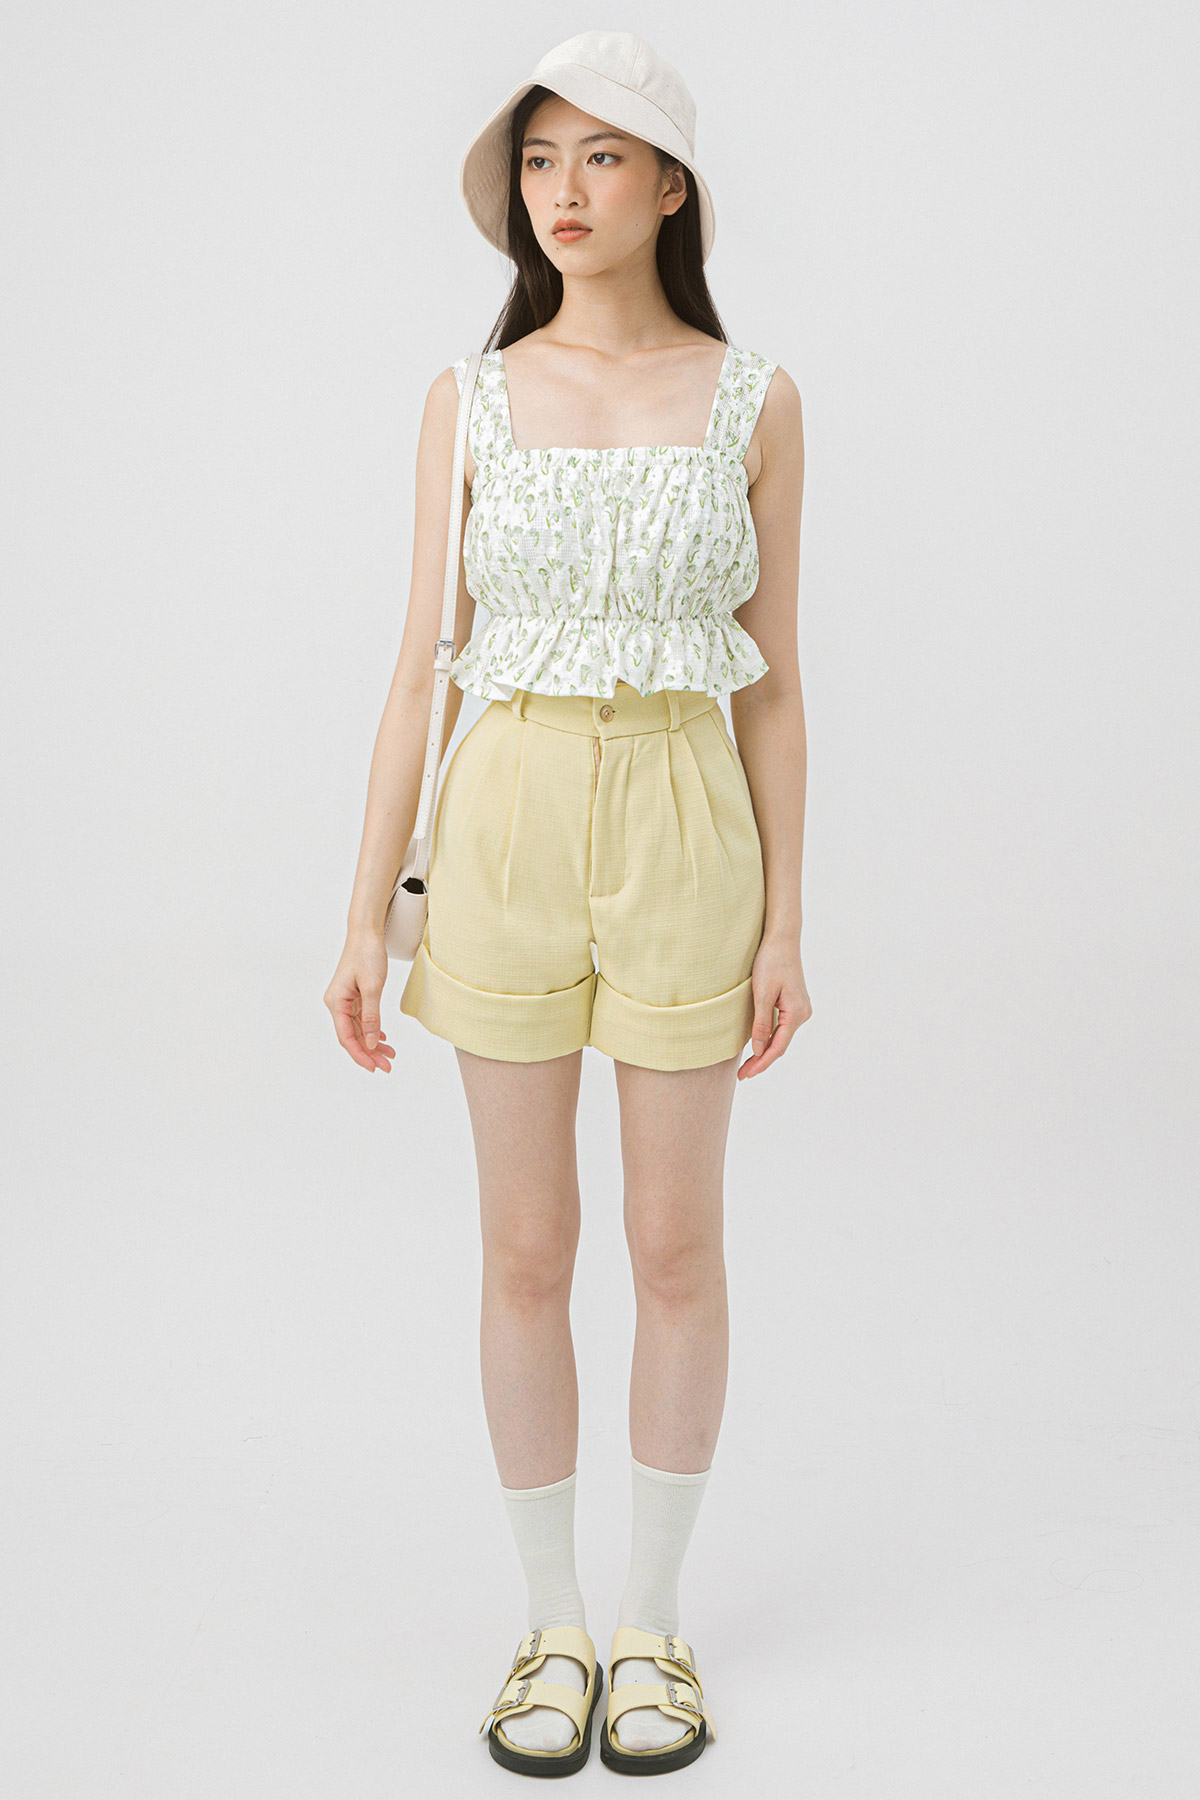 MARTINE SHORTS - LIGHT BUTTER [BY MODPARADE]